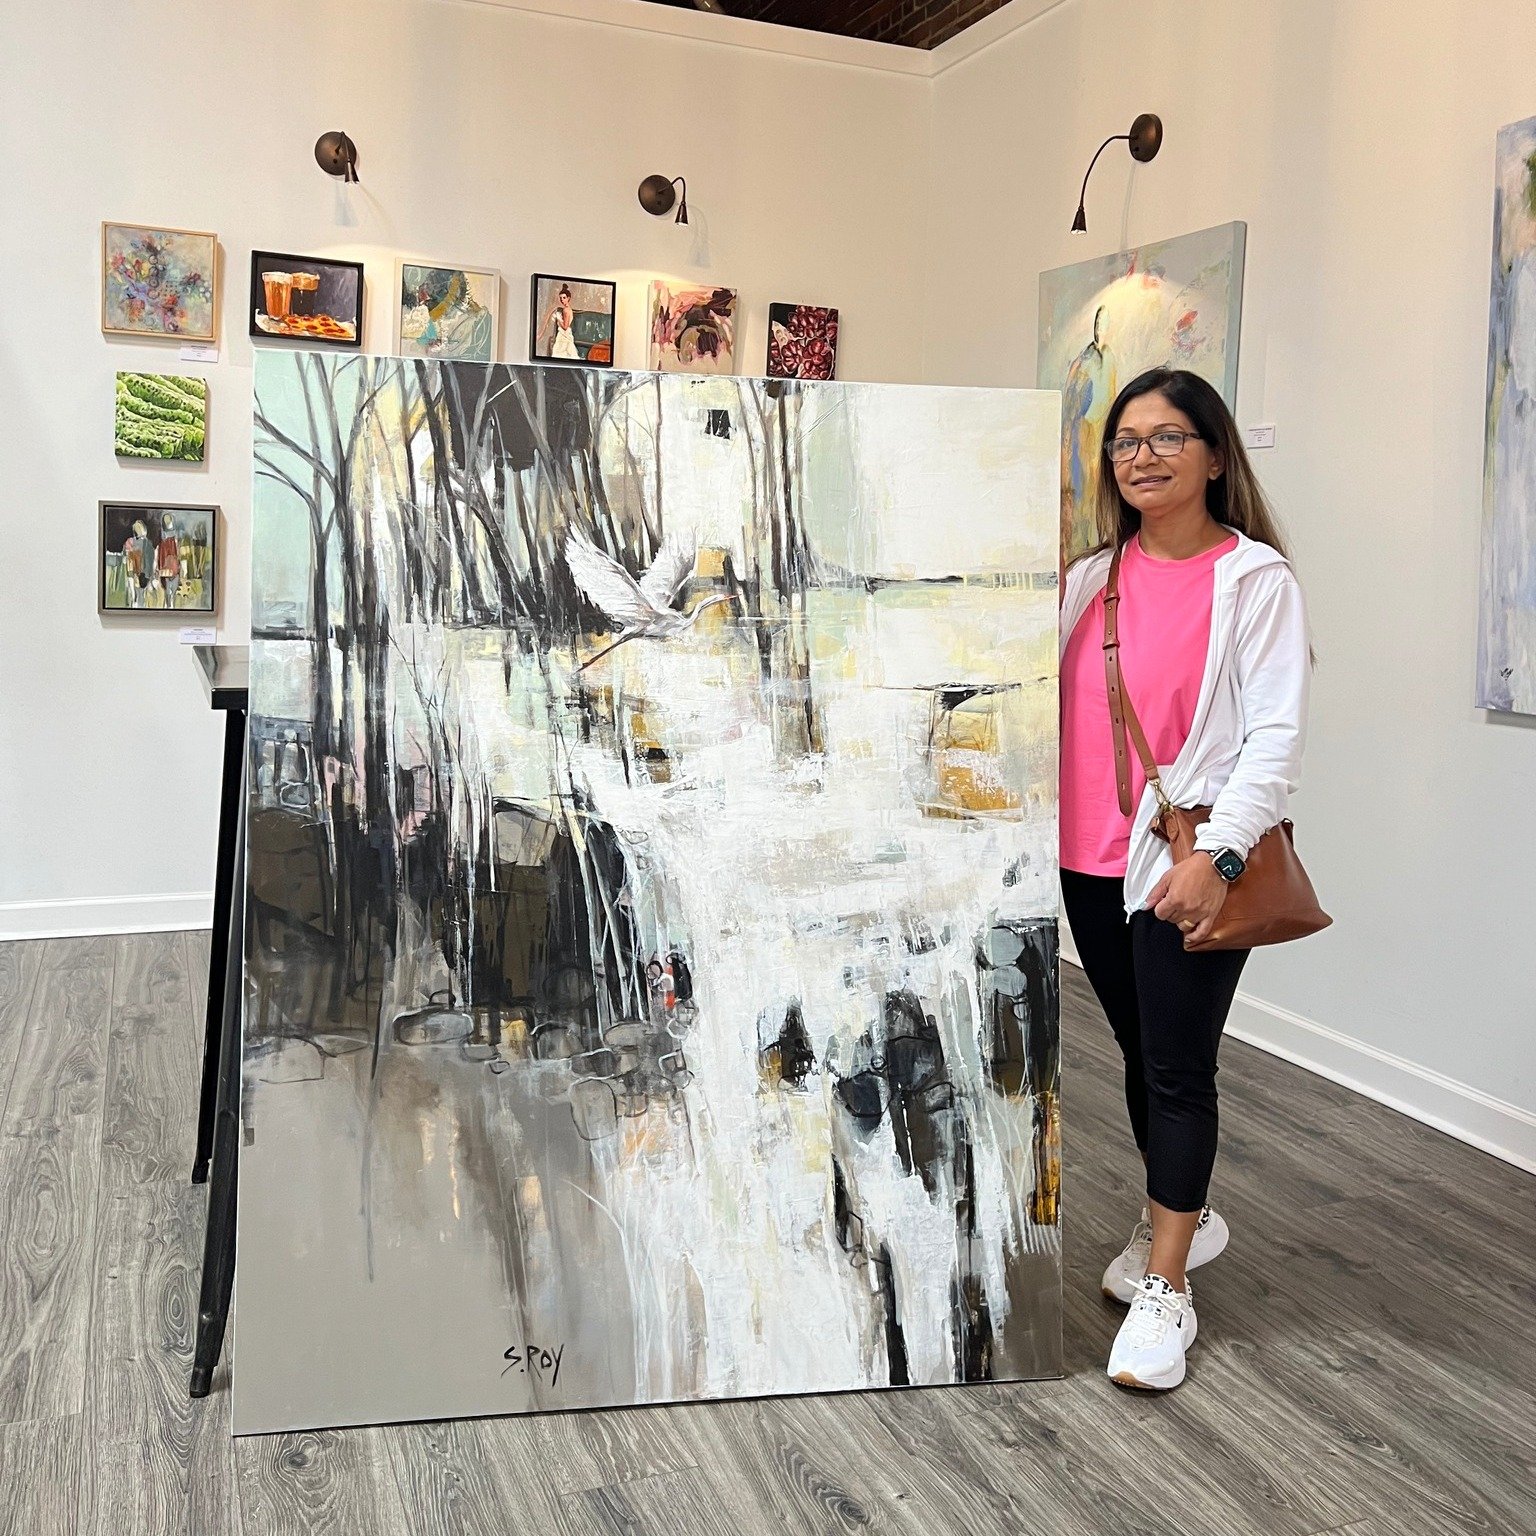 Please enjoy this preview of one of Sharmila's newest paintings! This painting will be on display beginning on May 3rd as part of HORIZON. We can't wait for you to see this breathtaking work in person!